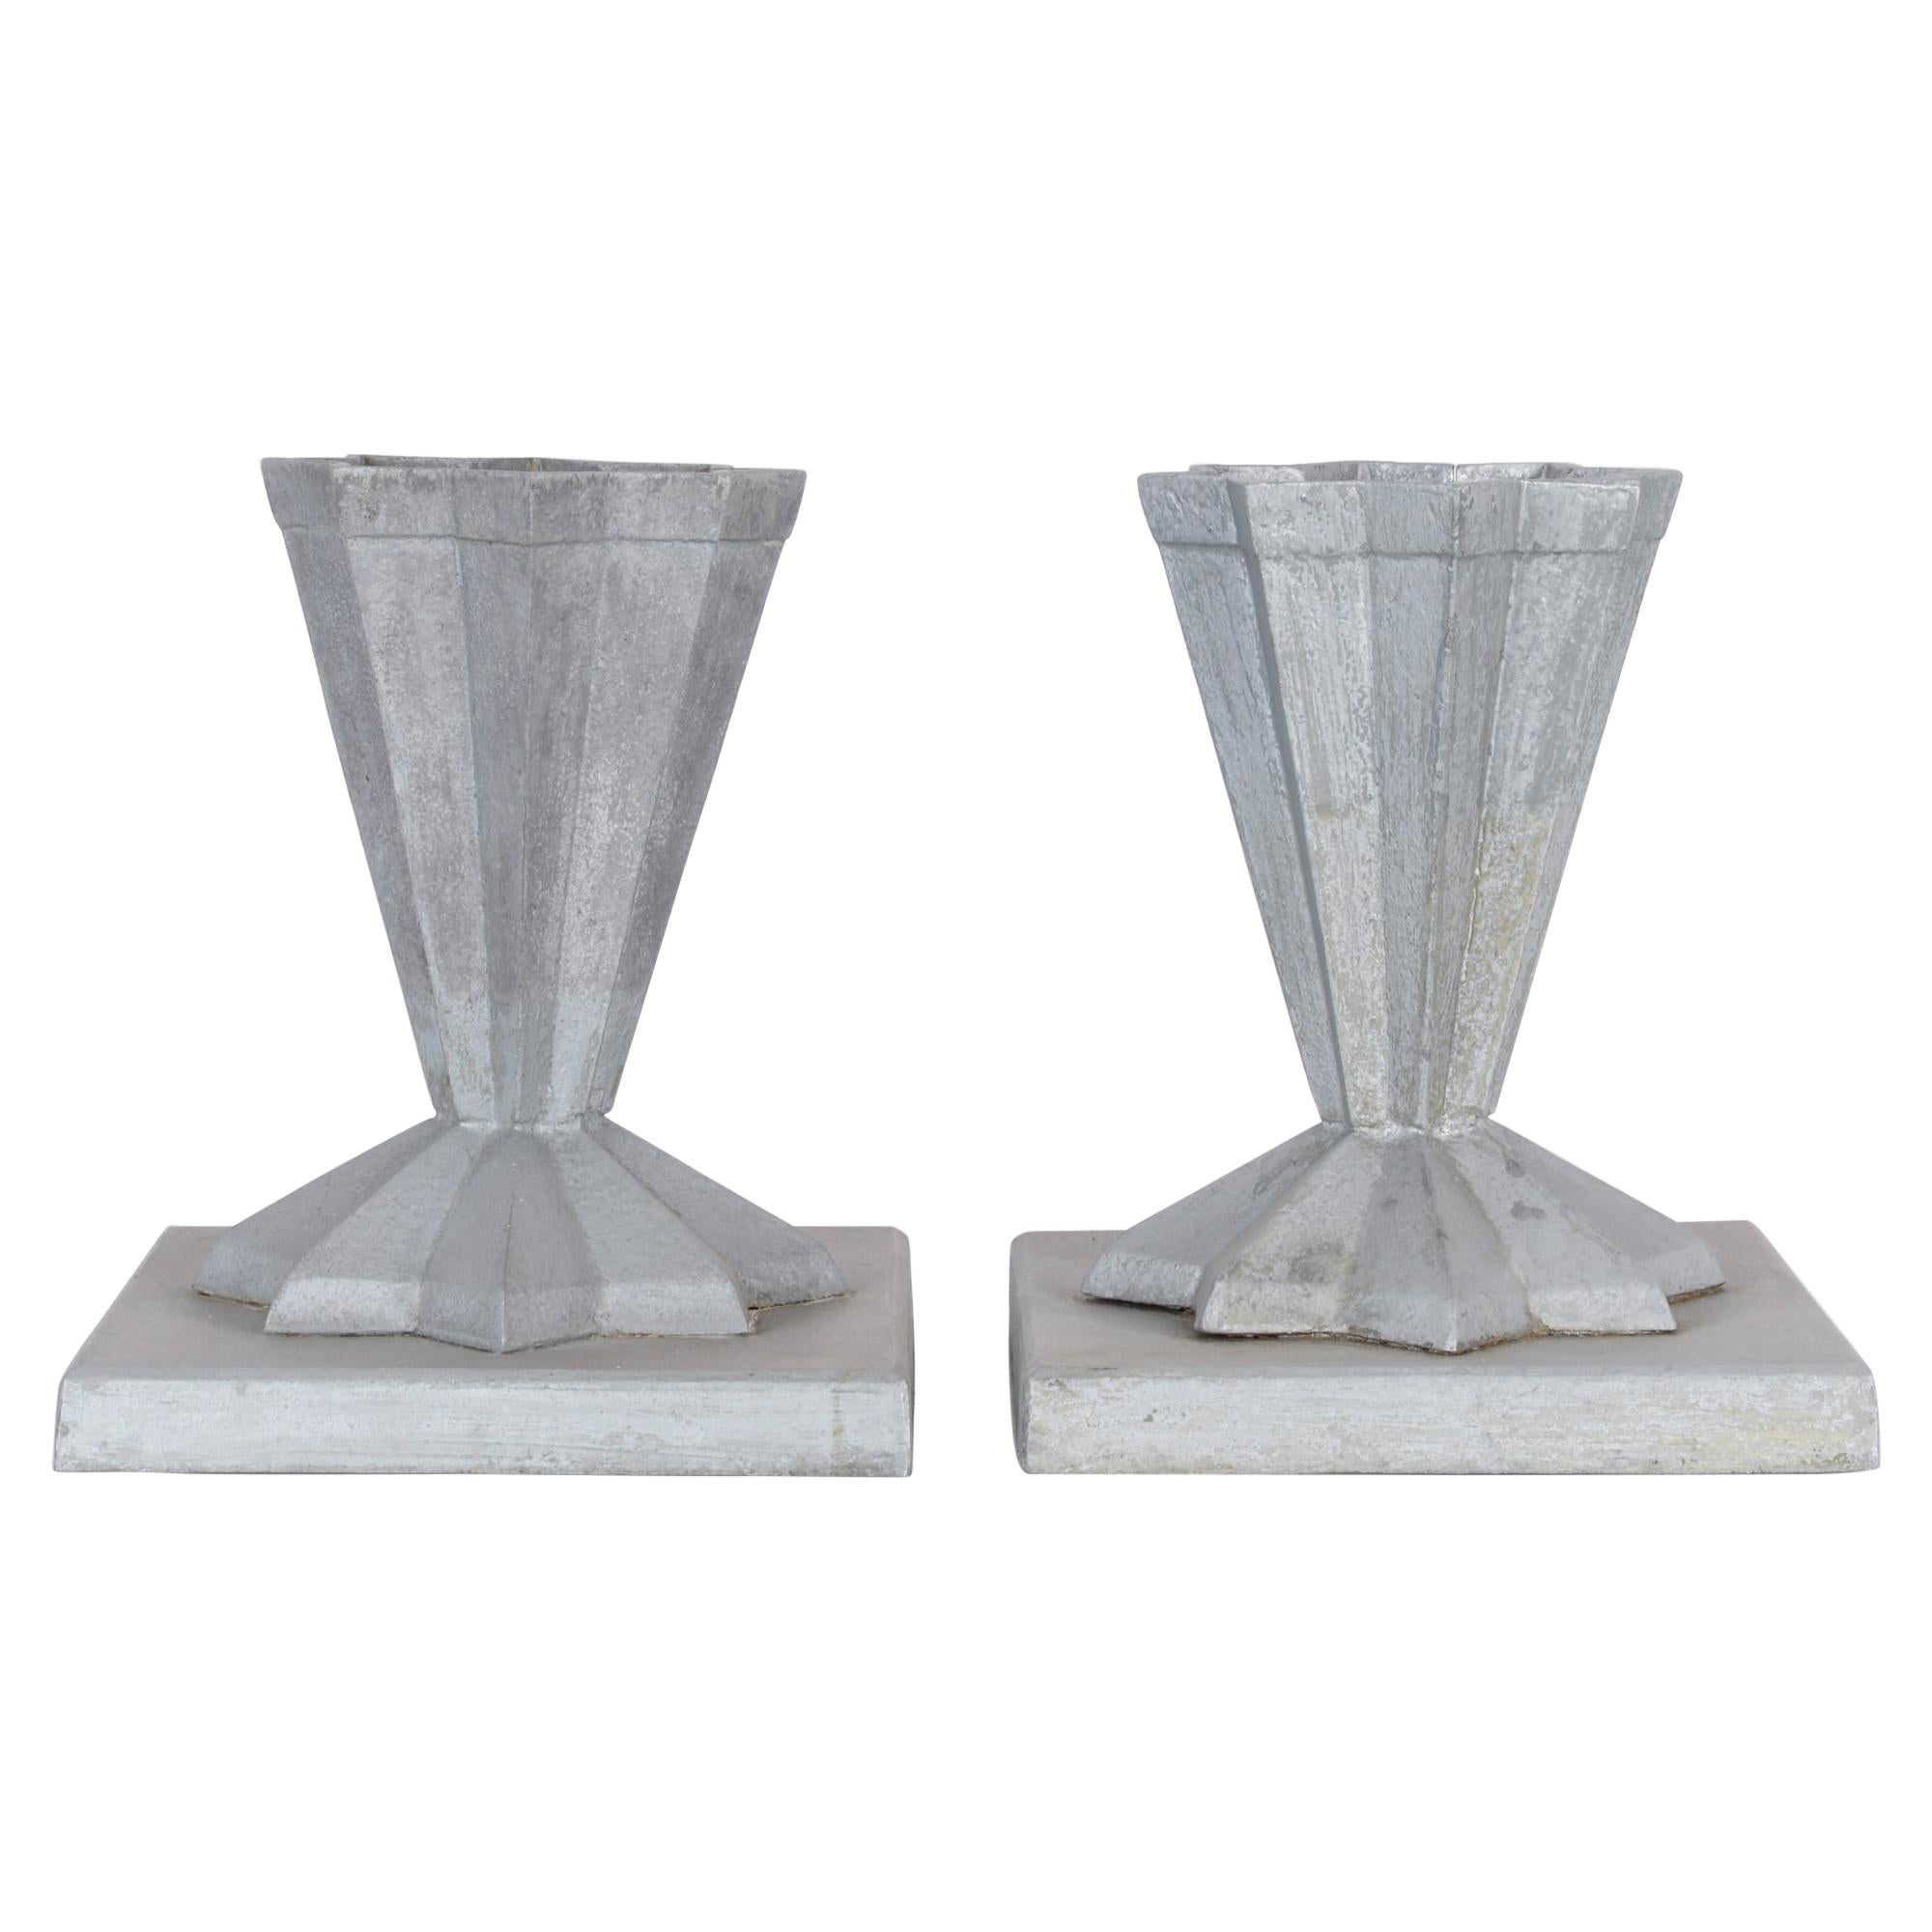 Early 20th Century French Cast Aluminum Planters, a Pair